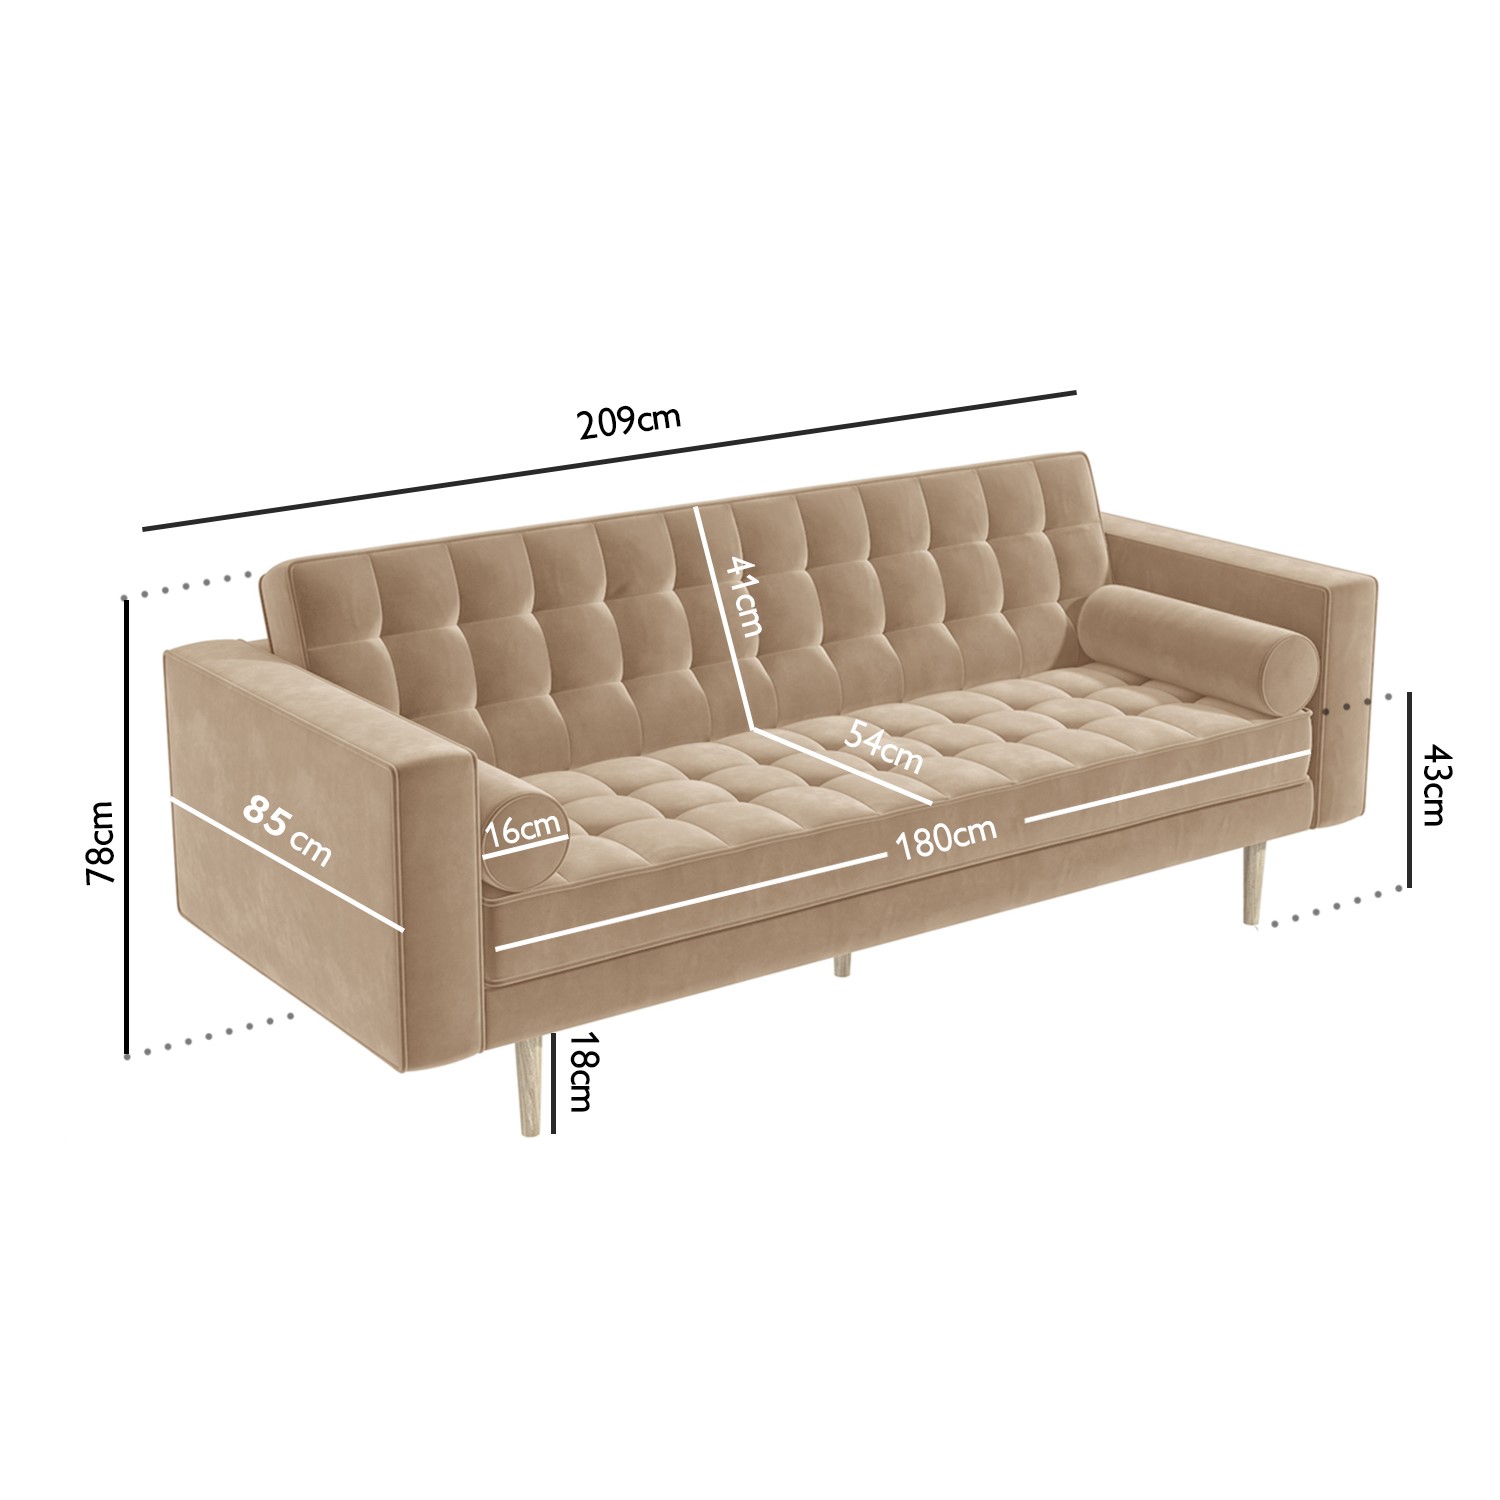 Beige Velvet 3 Seater Sofa With Bolster, How Many Metres Is A 3 Seater Sofa